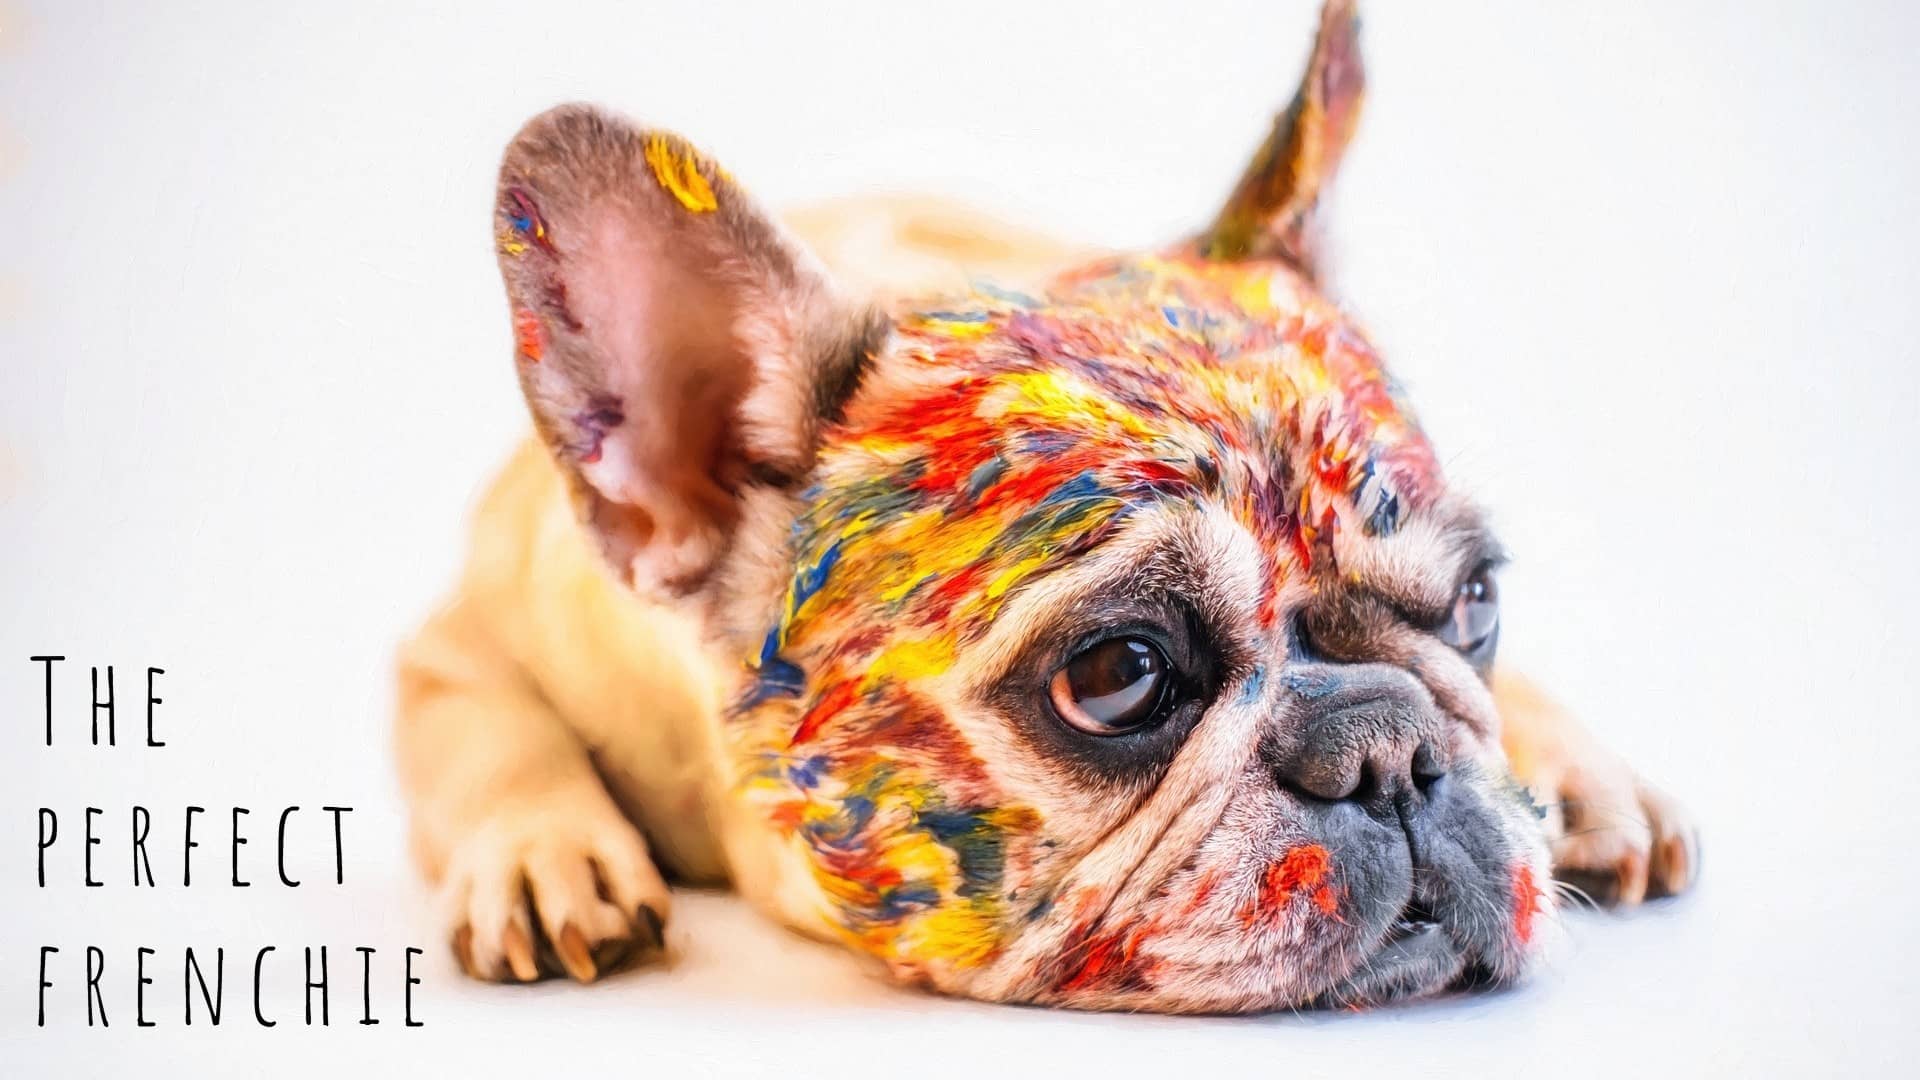 Do French Bulldogs shed? How to deal with French Bulldog shedding.